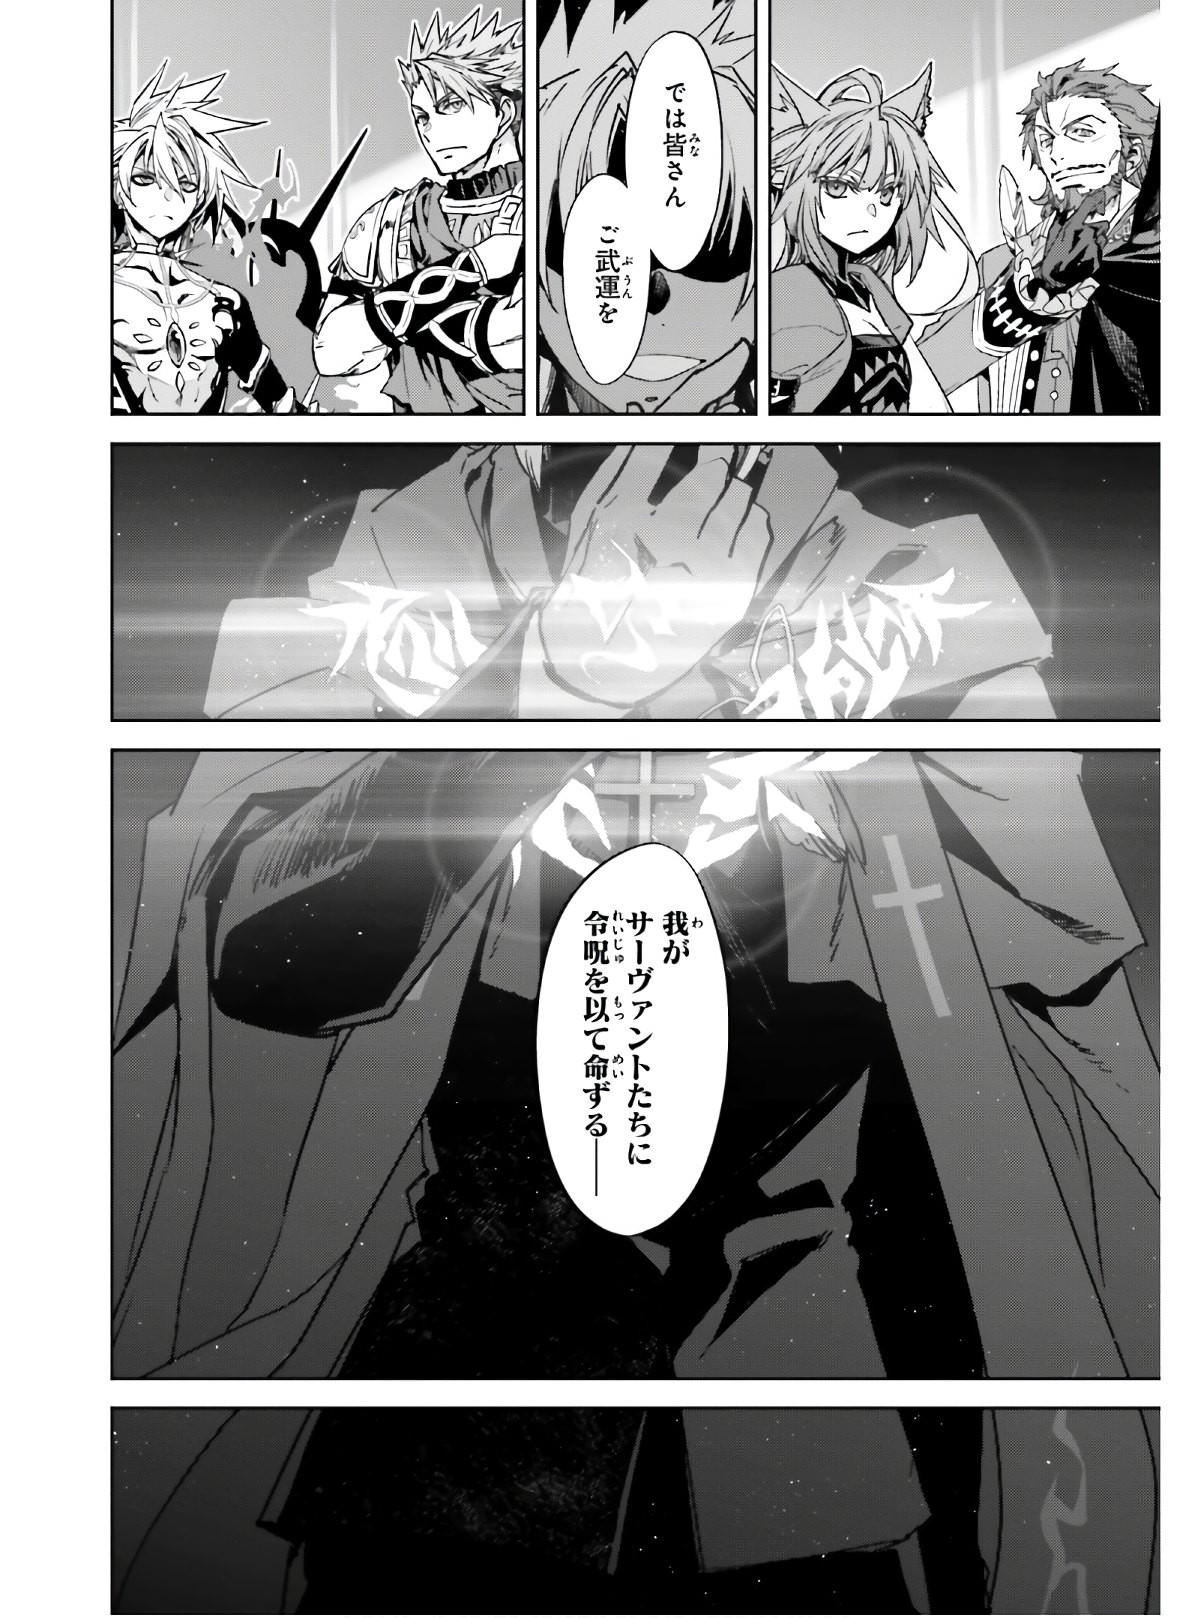 Fate-Apocrypha - Chapter 52 - Page 4